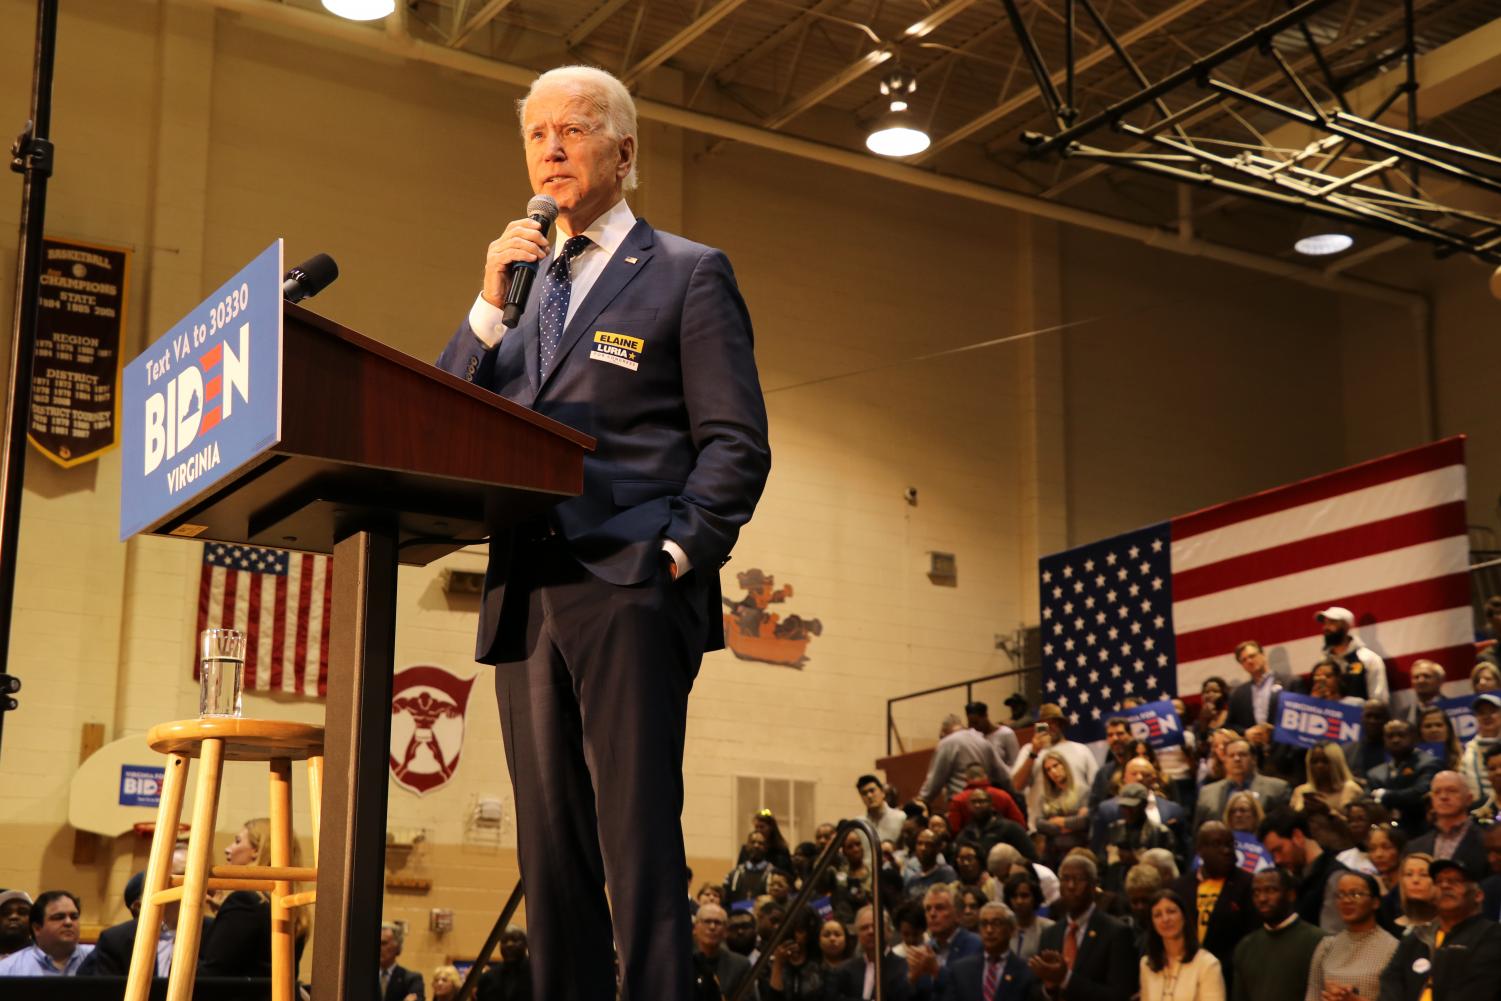 Former+Vice+President+Joe+Biden+at+a+rally+in+Virginia+before+Super+Tuesday.+Biden+is+the+presumptive+presidential+nominee+for+the+Democratic+Party+for+the+2020+election%2C+but+COVID-19+has+affected+the+way+Biden%2C+and+other+candidates%2C+will+have+to+campaign.+